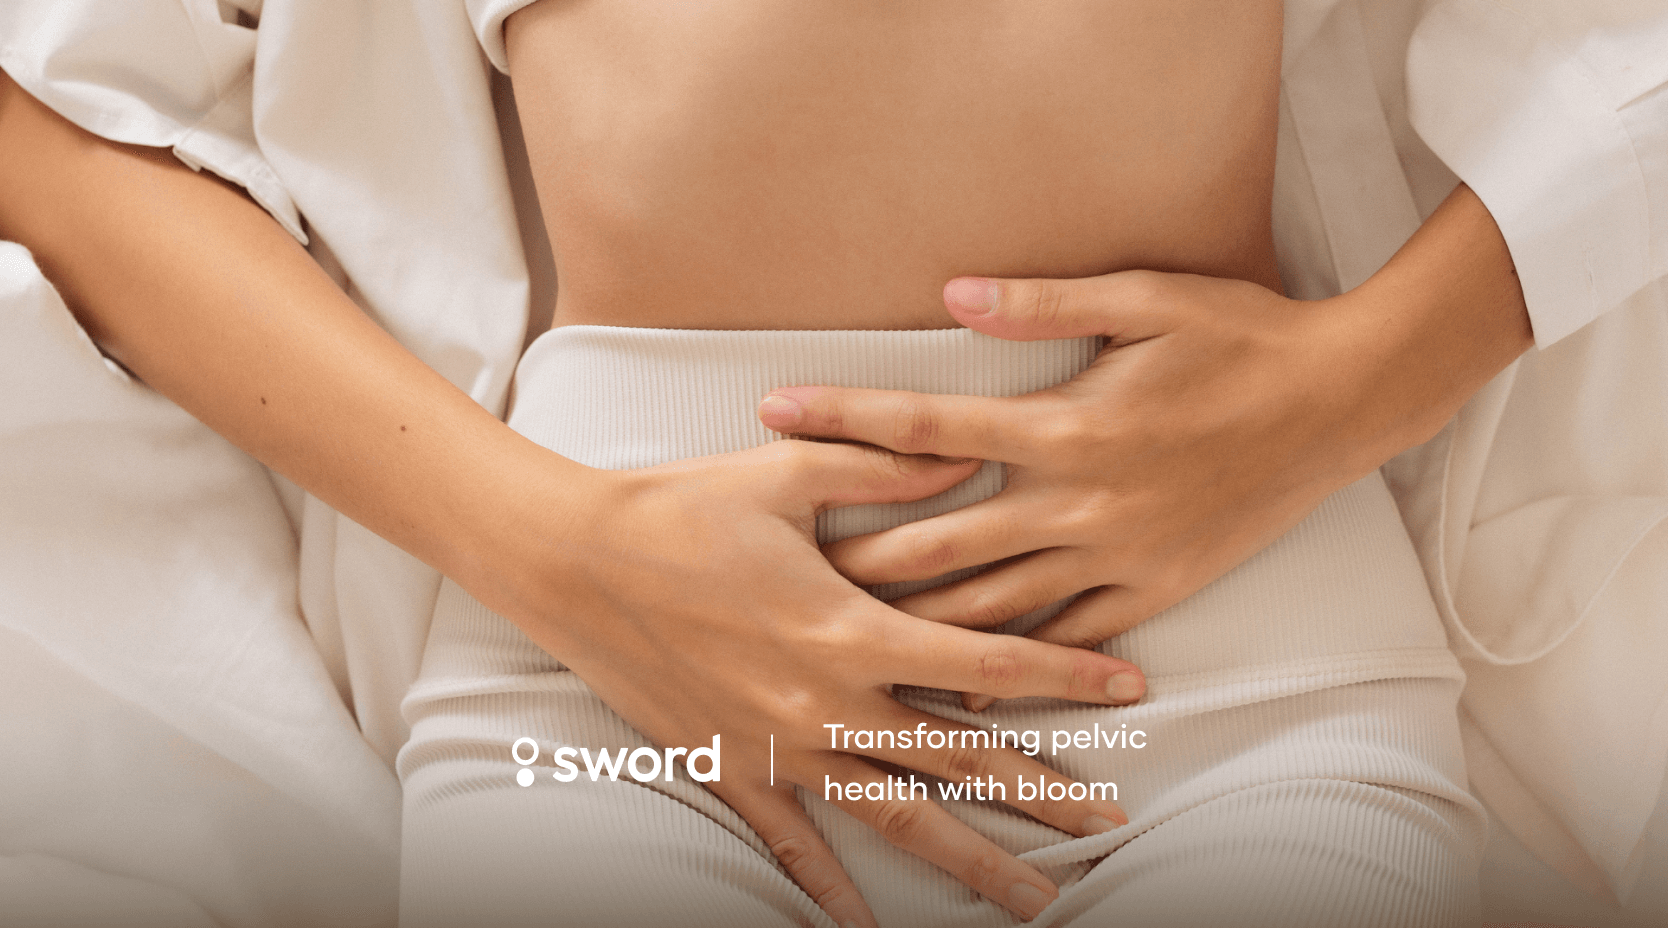 How to manage endometriosis with pelvic therapy